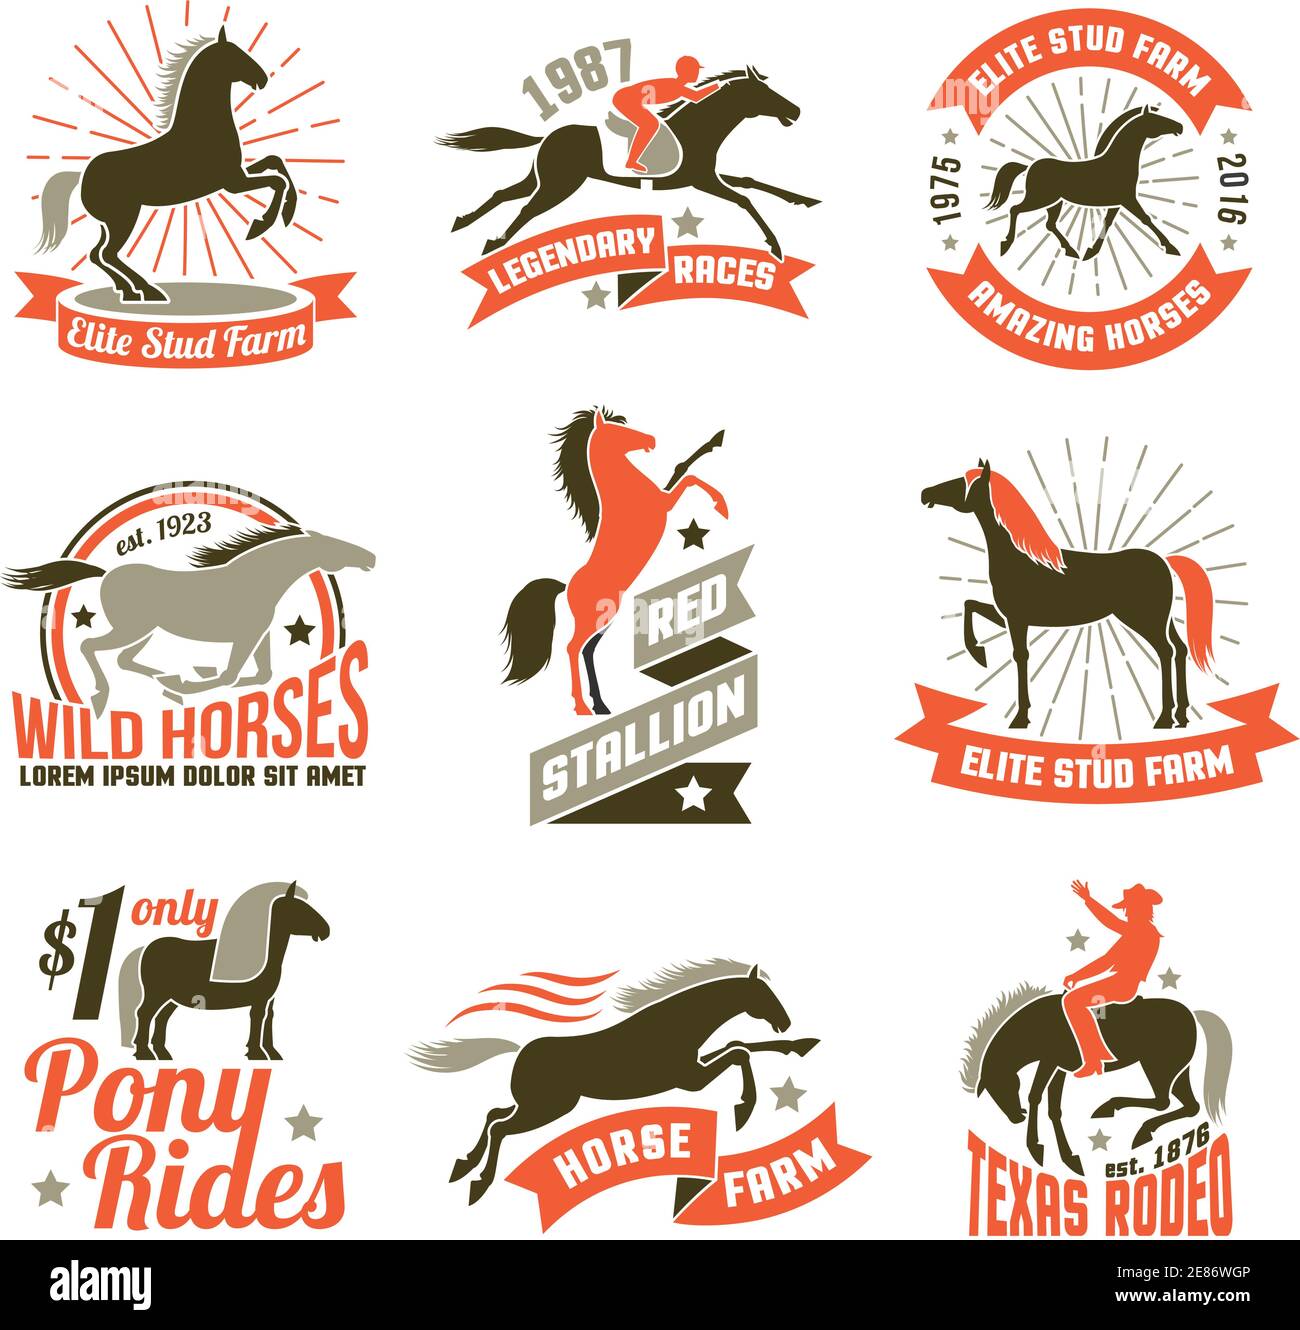 Elite stud farms for horses breeding and jockey clubs historical racing three colored emblems collection isolated vector illustration Stock Vector